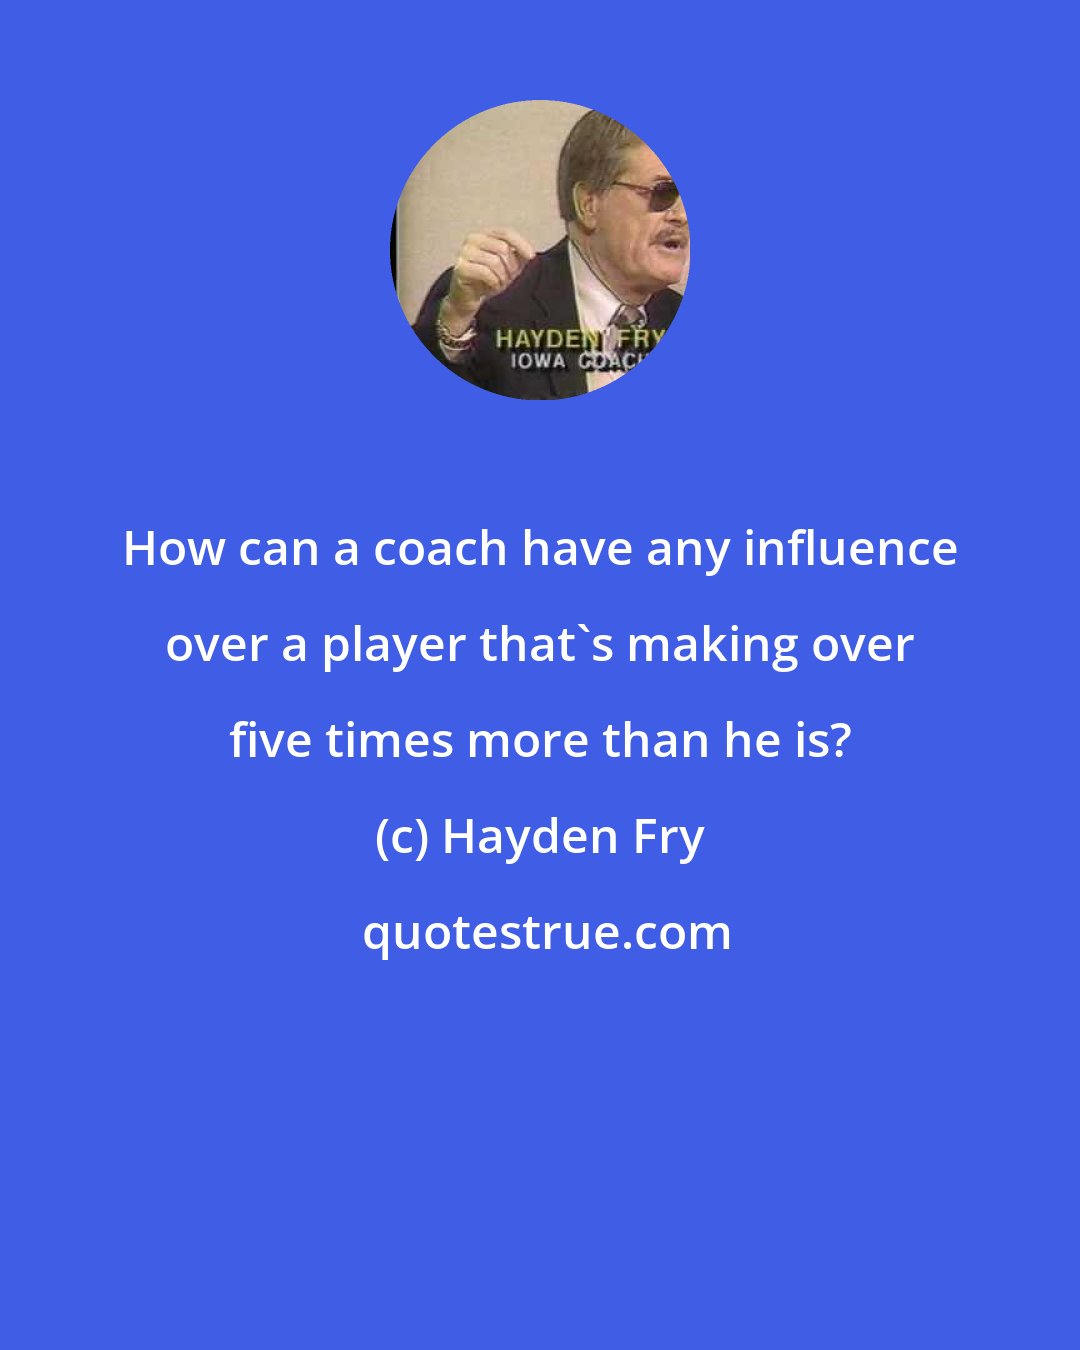 Hayden Fry: How can a coach have any influence over a player that's making over five times more than he is?